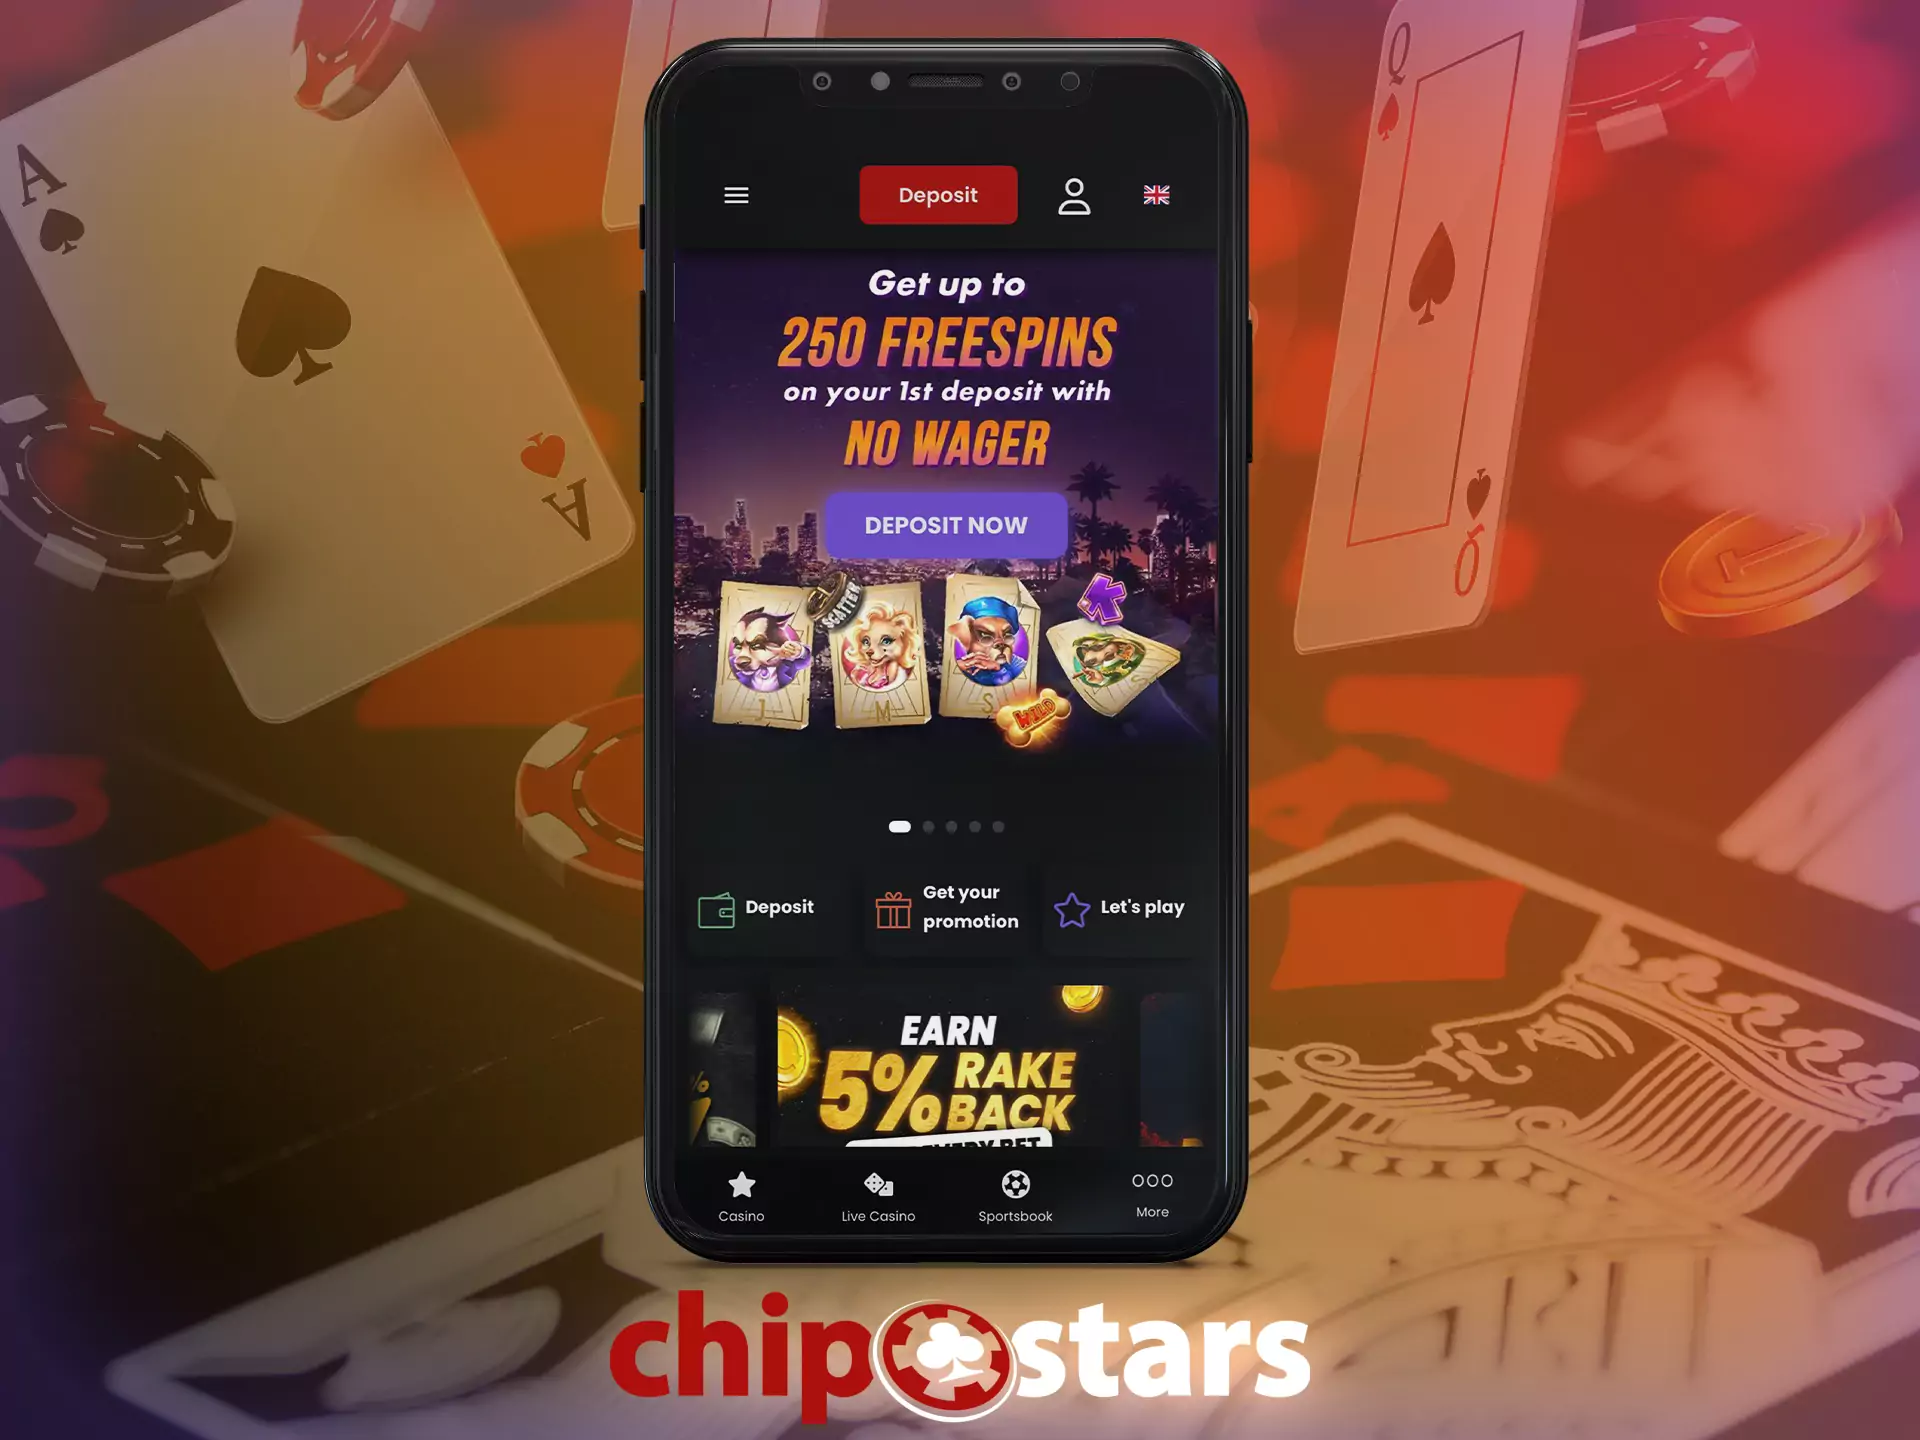 For smartphone users, the Chipstars mobile version is available in a browser.